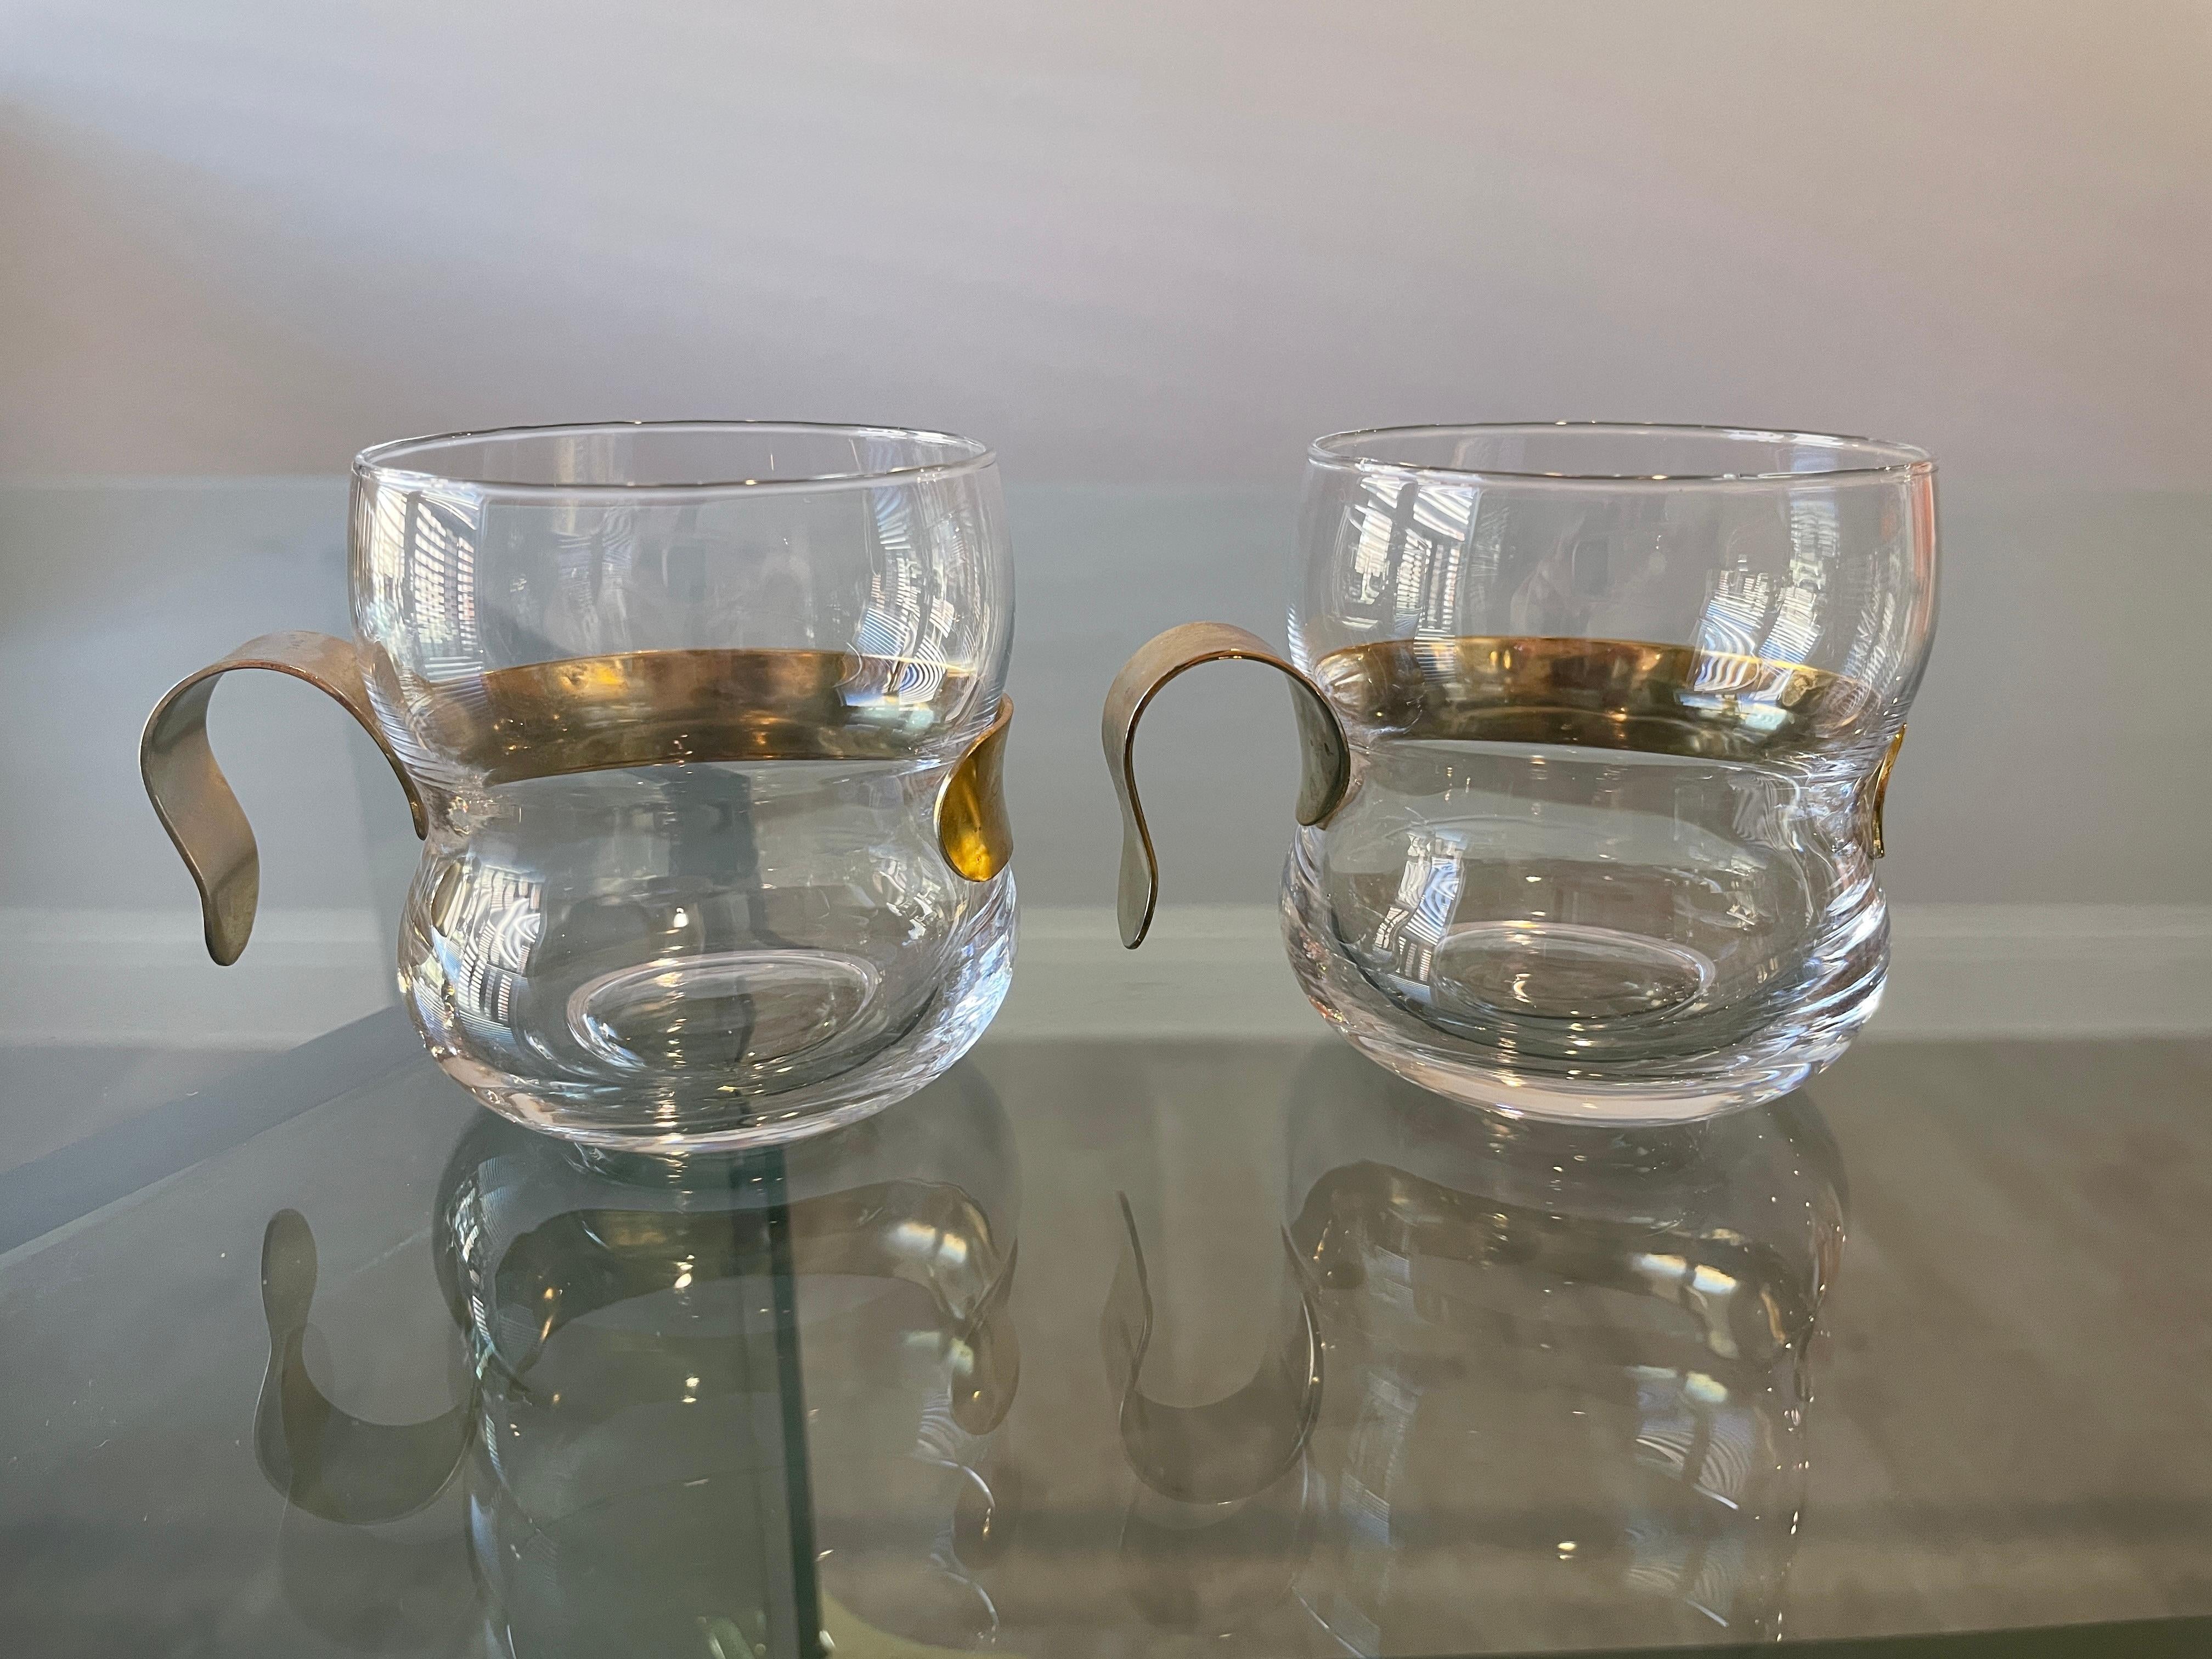 Vintage brass and glass Demitasse cups. Glass cups with brass plated handles that can easily be removed for washing. Unique vintage cups for the espresso lover! Each glass saucer measures 5.38 D.